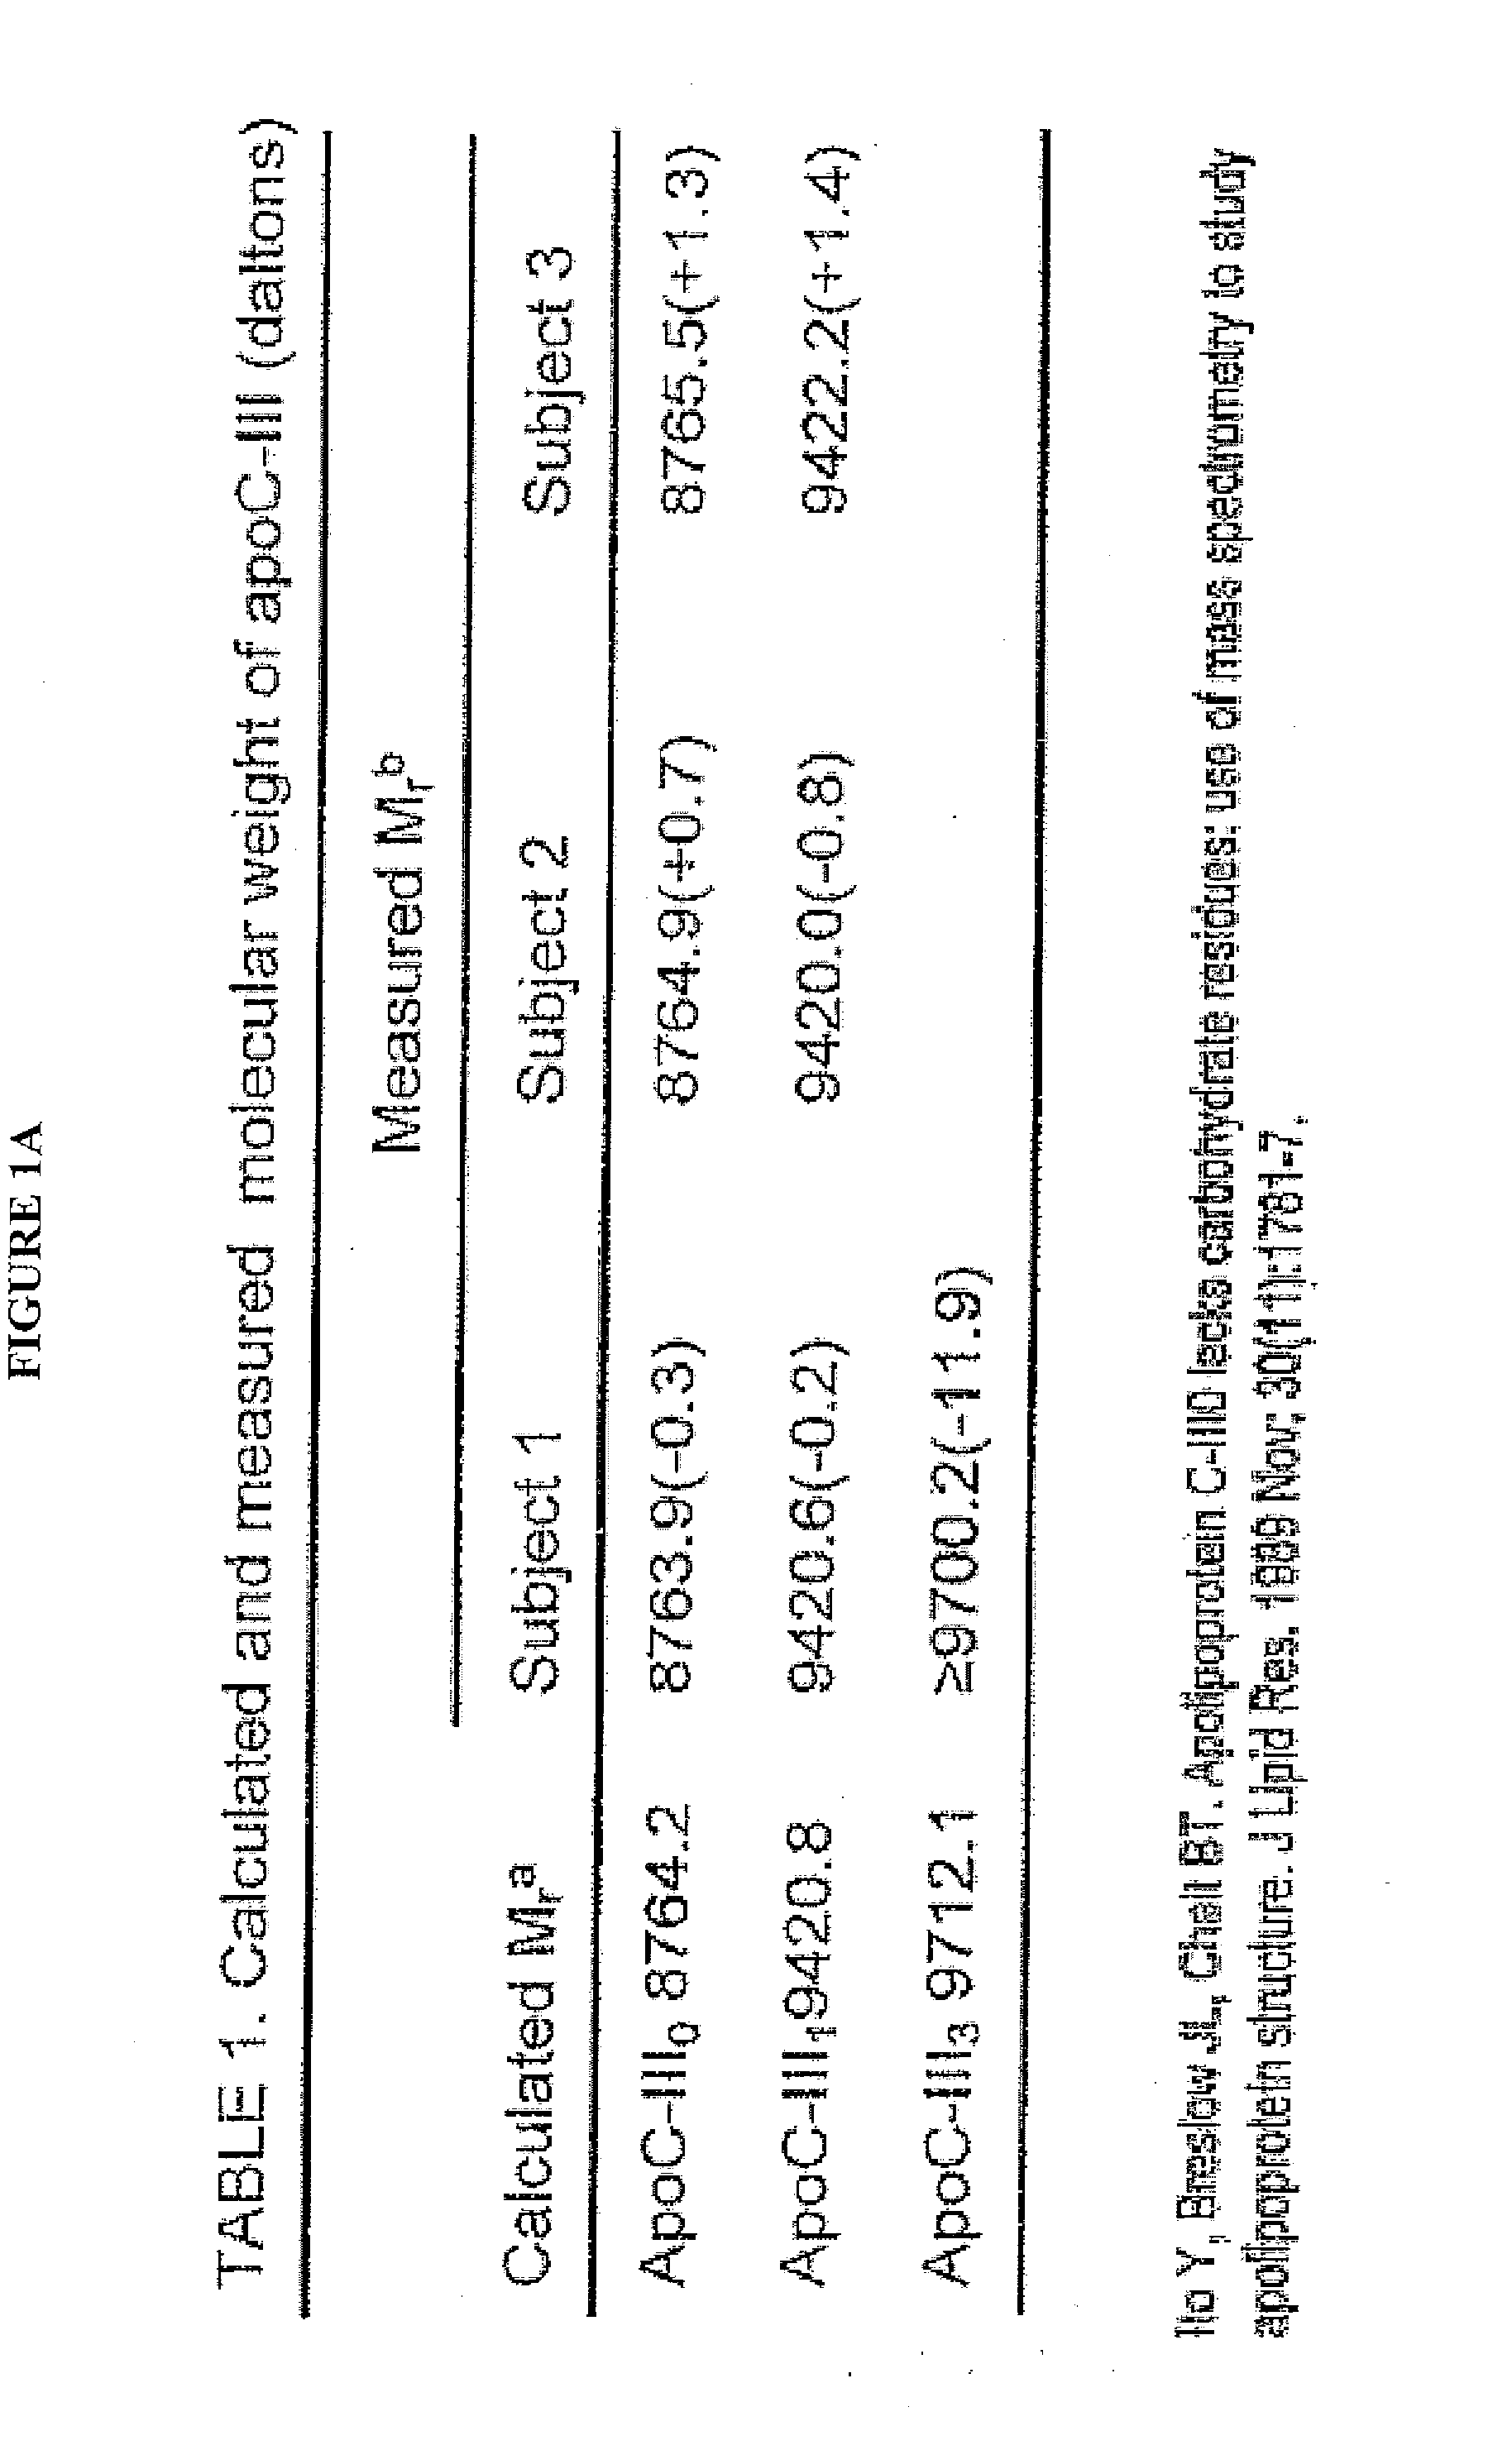 Apolipoprotein fingerprinting technique and methods related thereto